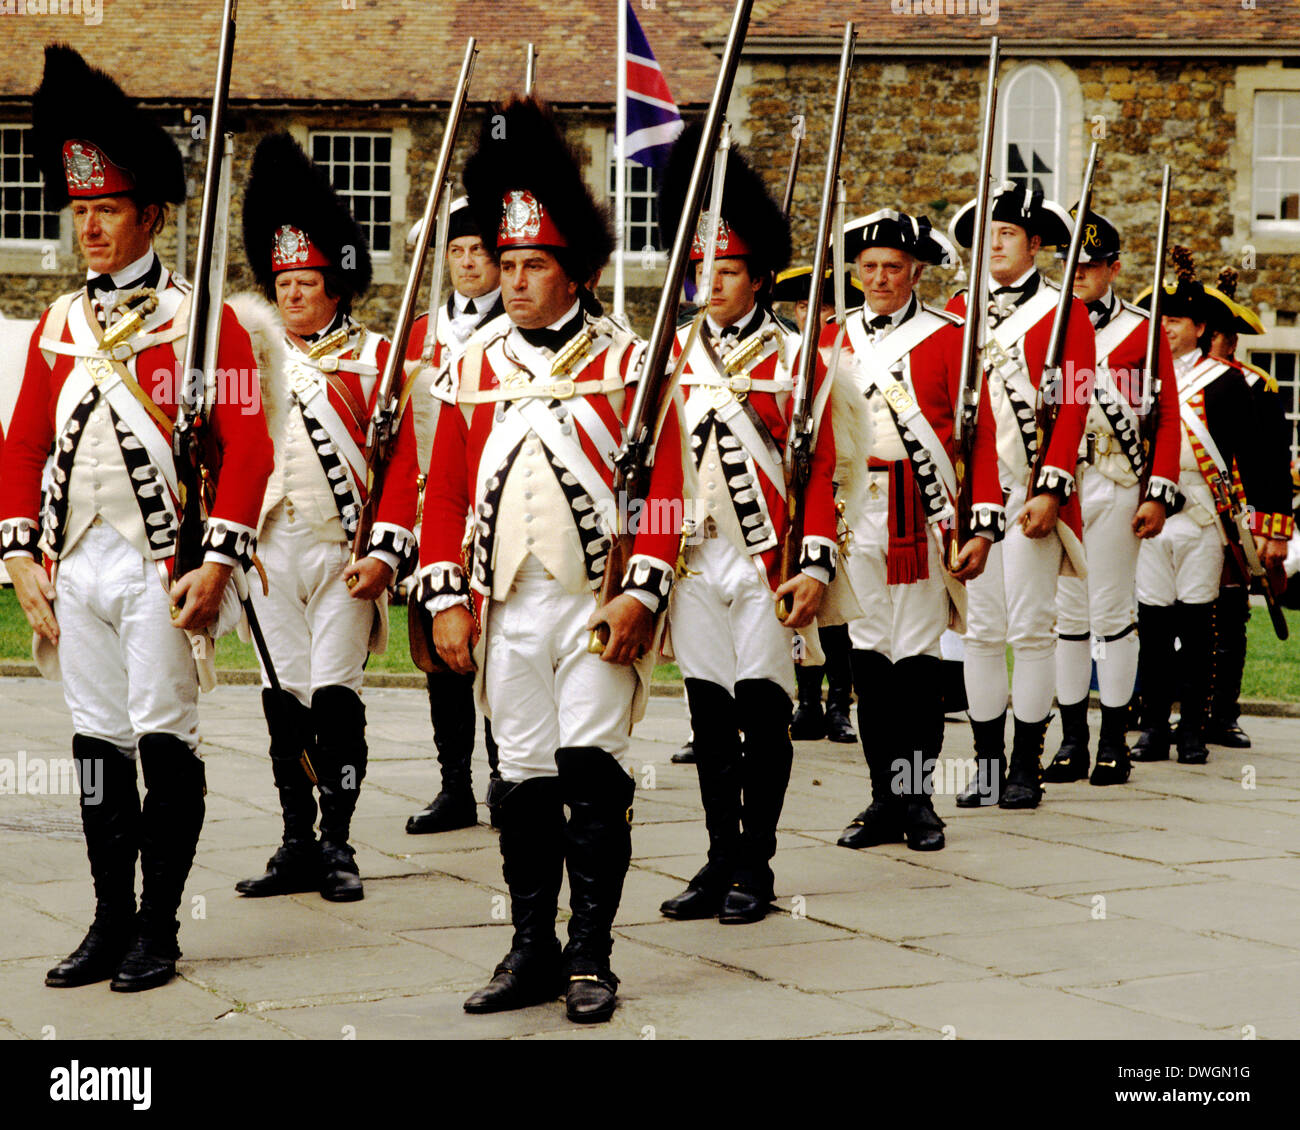 English Redcoats, 1776, as deployed in American War of Independence, historical re-enactment soldier soldiers, muskets, parade England UK Stock Photo